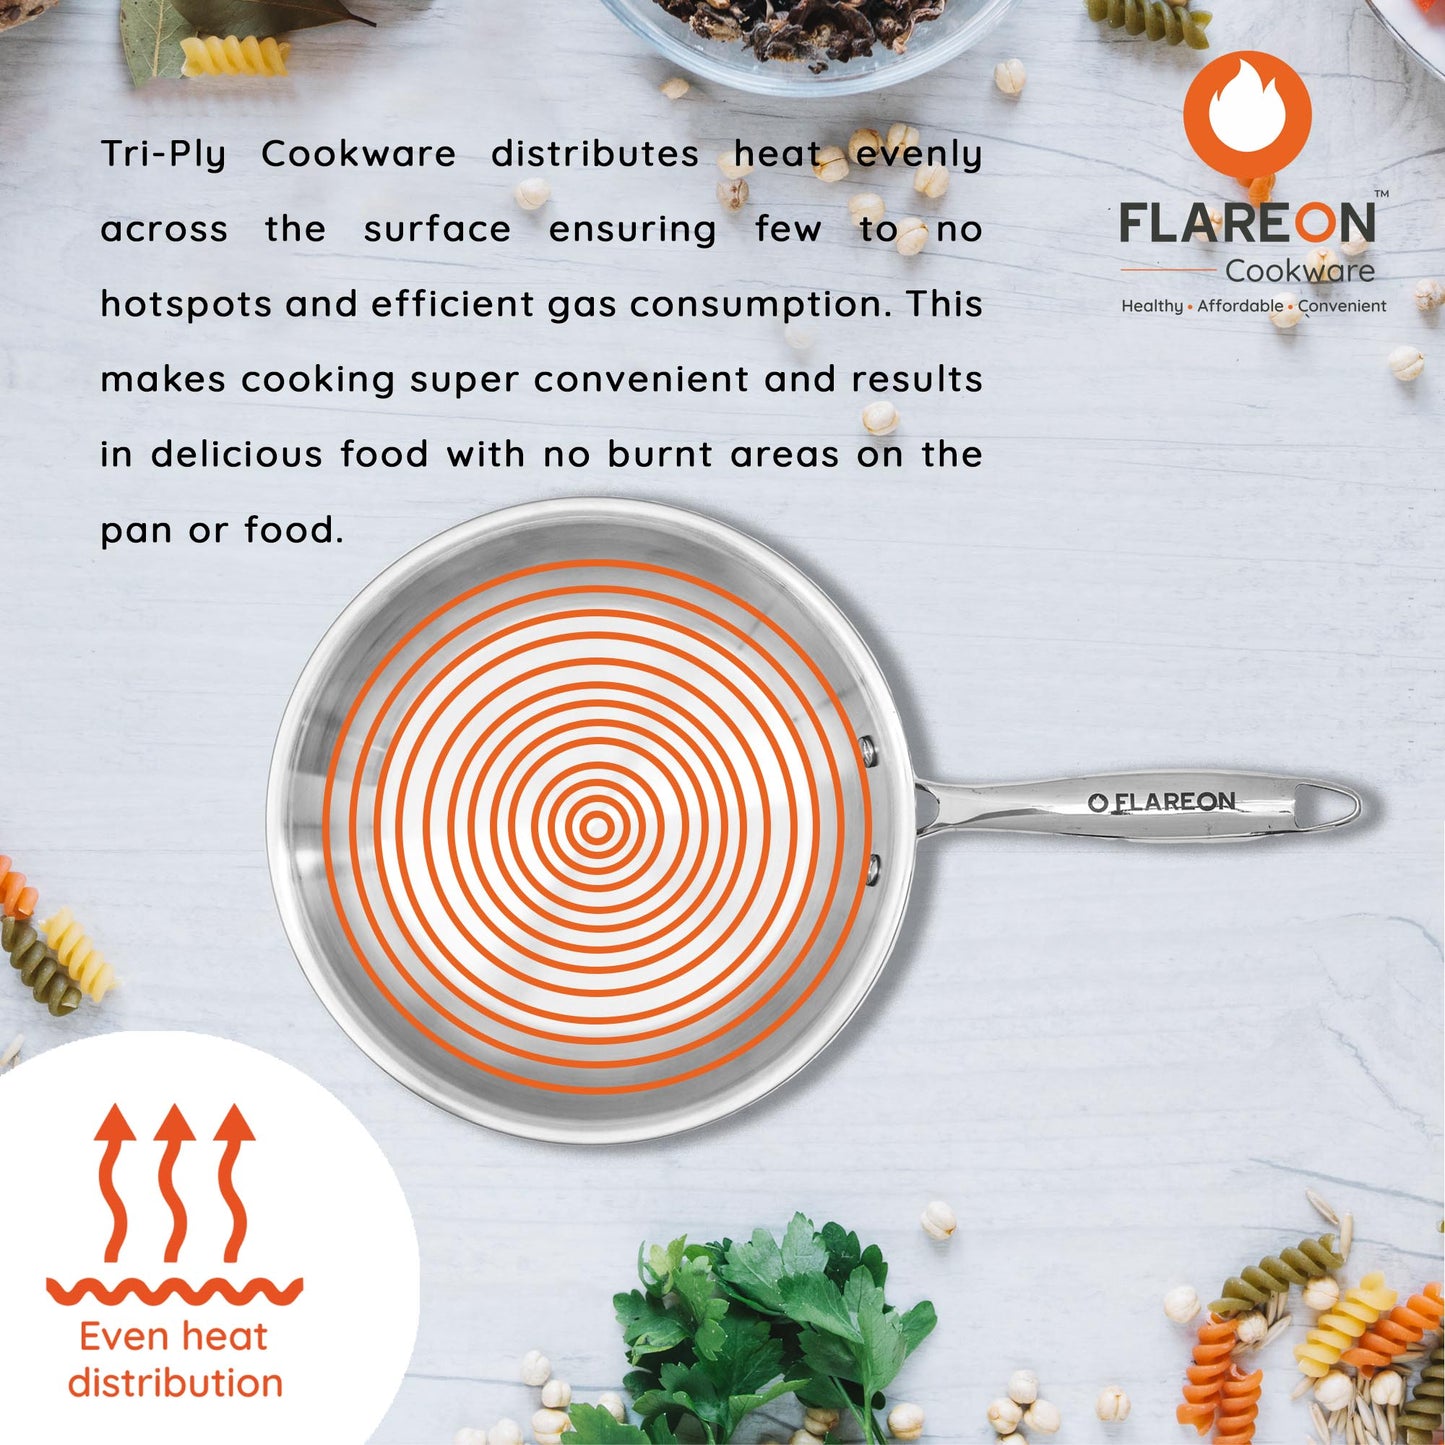 FlareOn's TriPly Stainless Steel Fry Pan 22 Cm- Even Heat Distribution